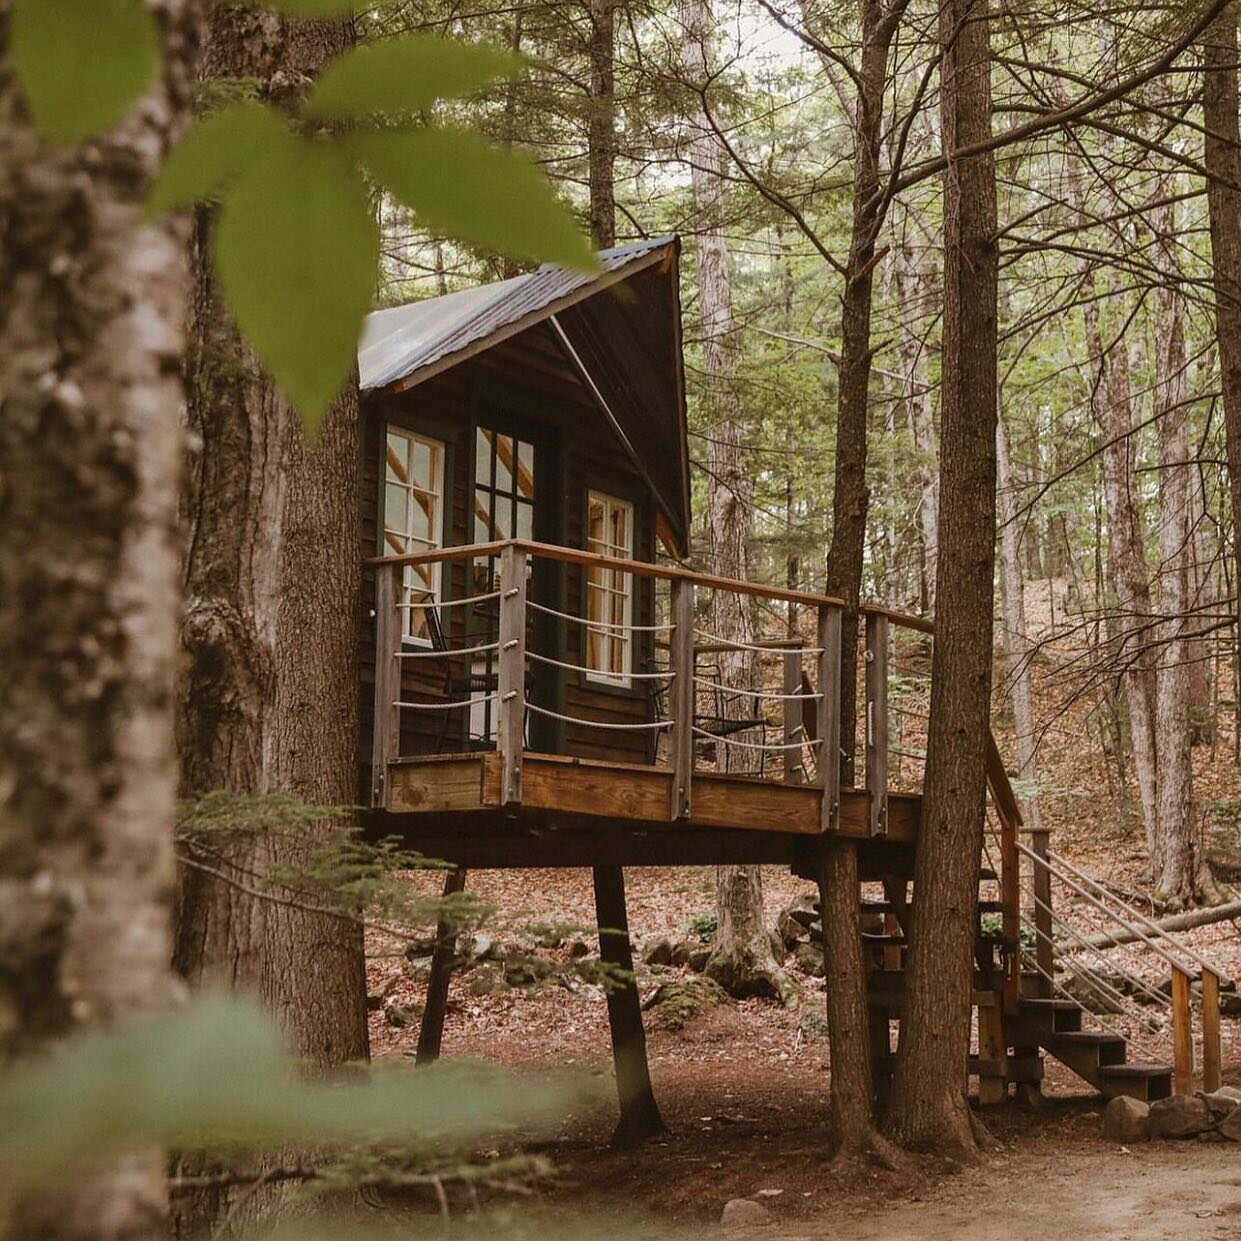 Check out this cabin rental from @the_salisbury_hideouts! Looks to be the kind of place you go for a weekend and never want to leave. There is nothing like a cabin in the pines. Absolute perfection. 

#CabinLife #RusticRetreat #AmericanCabins #LogCab